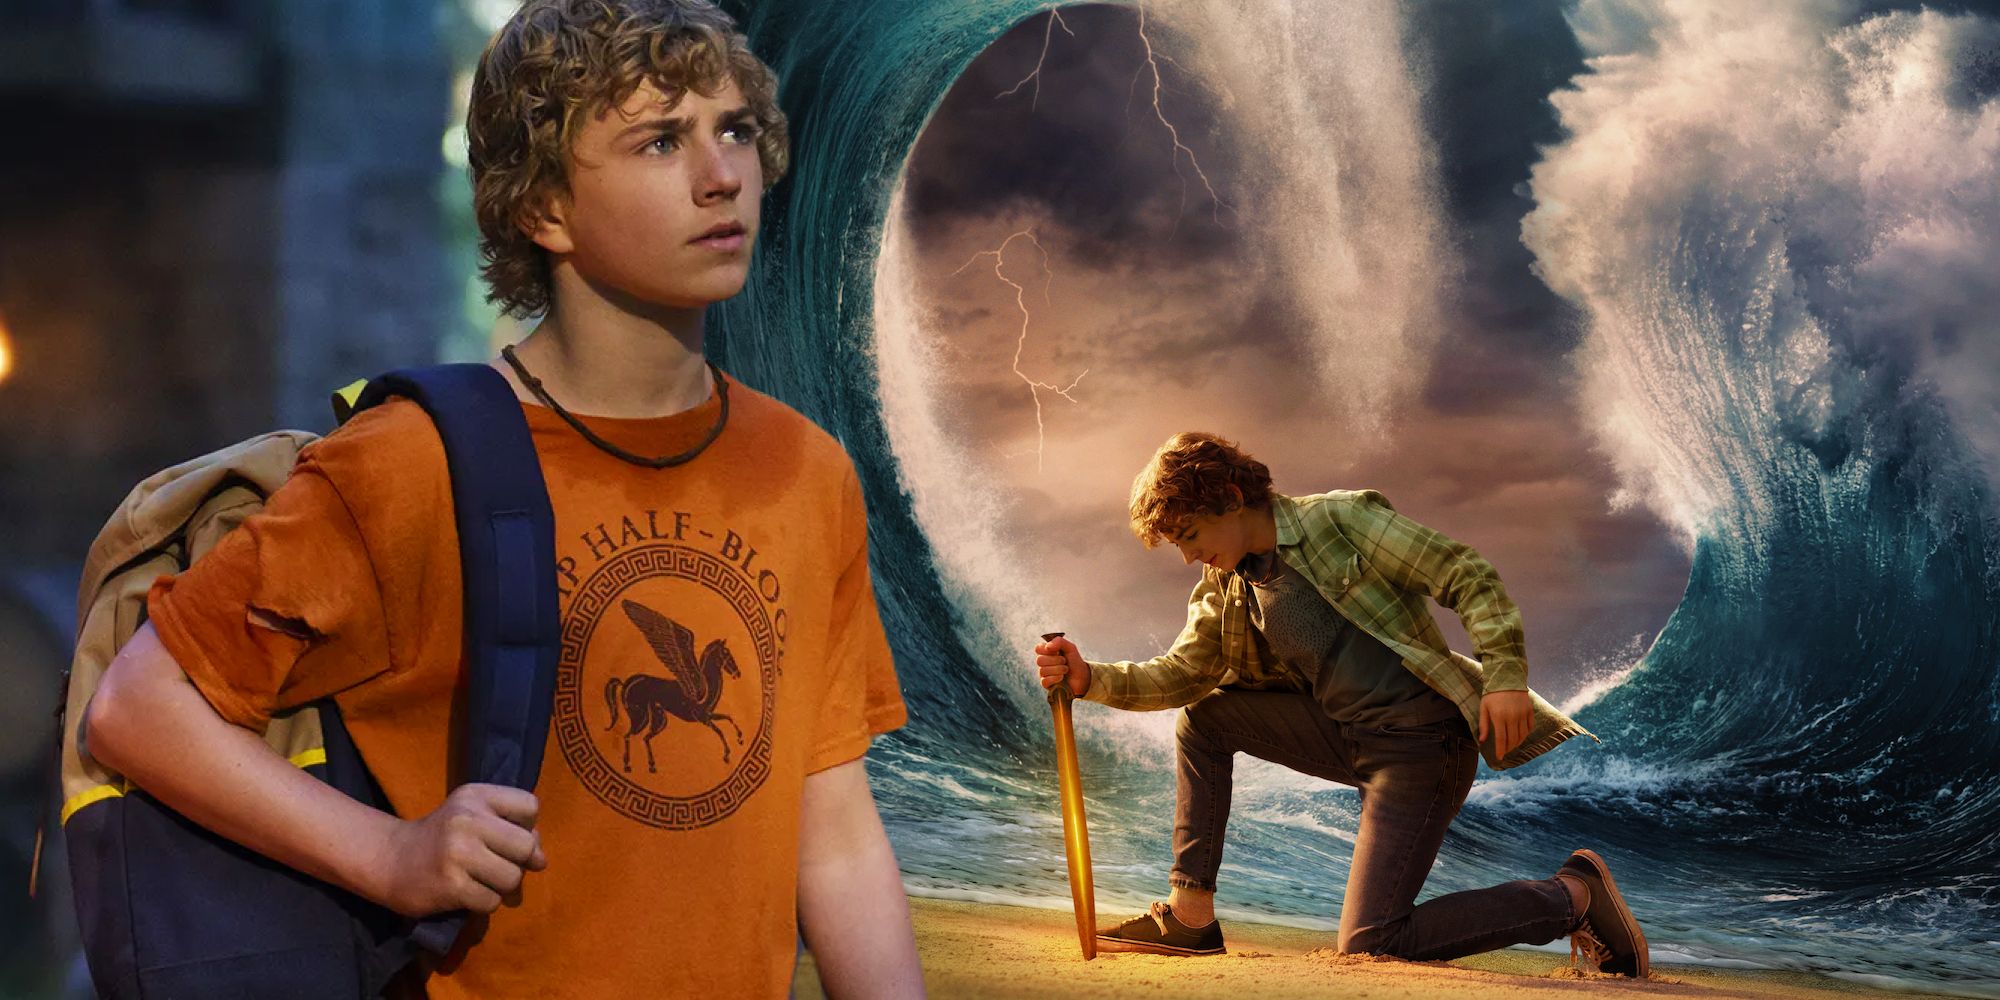 Walker Scobell as Percy Jackson next to the poster for Percy Jackson and the Olympians